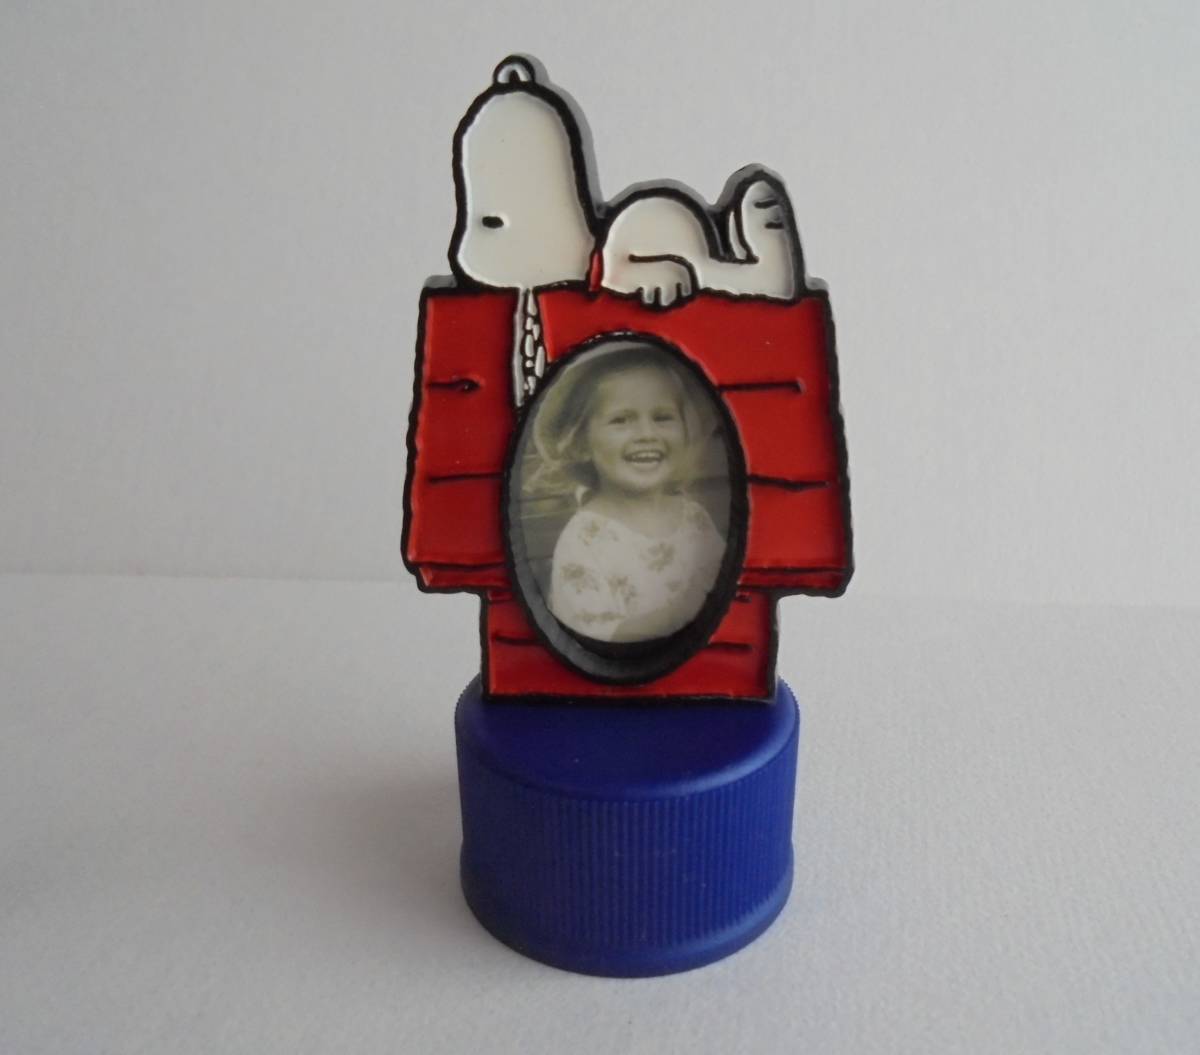 Rare not for sale SNOOPY Photo frame PEPSI Bottle cap 29 Unused Stored item, character, peanuts, snoopy, snoopy